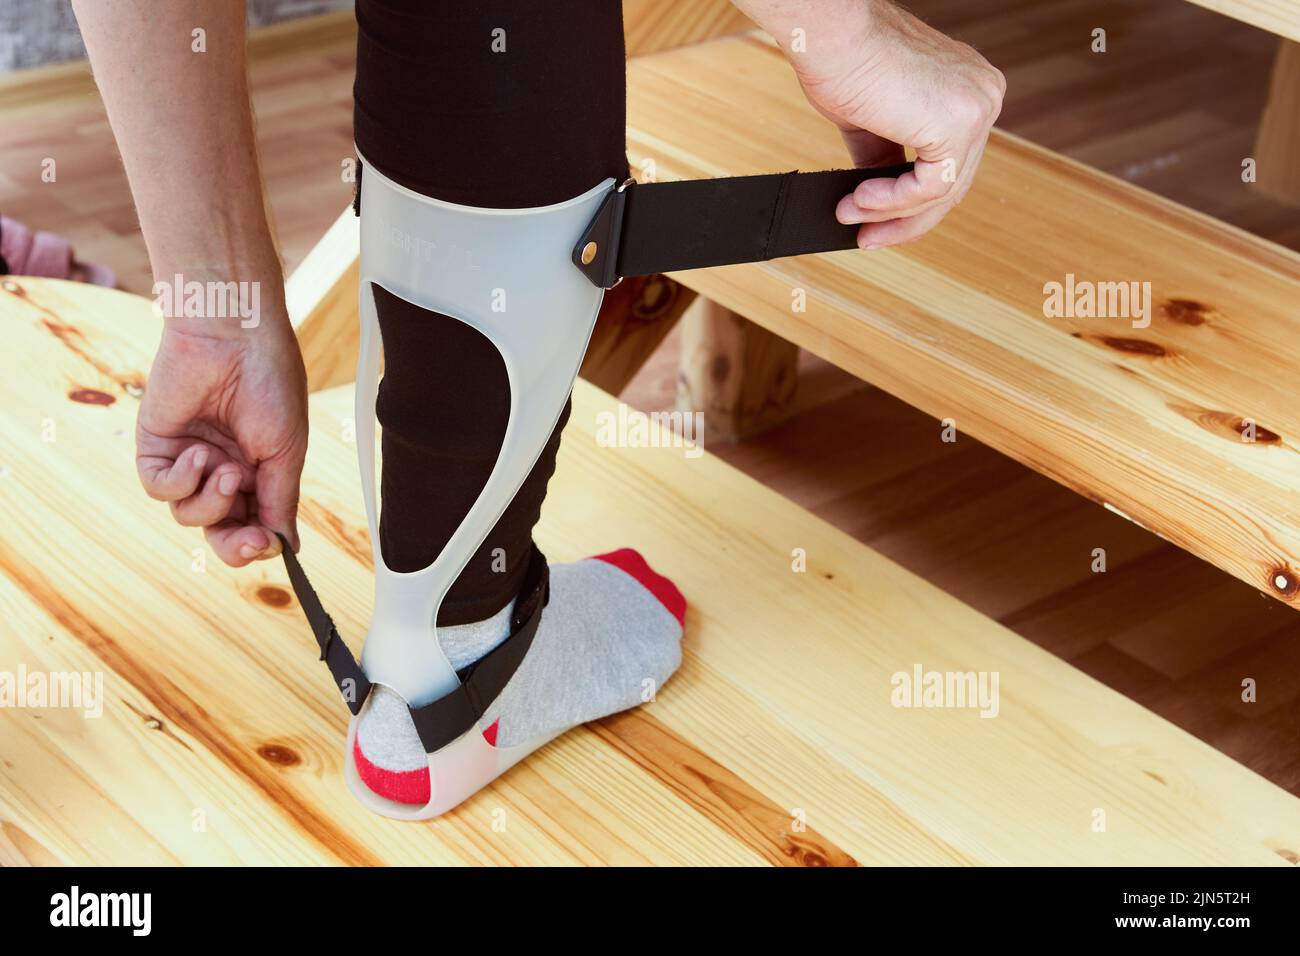 Ankle foot orthosis AFO foot drop support brace. Stock Photo